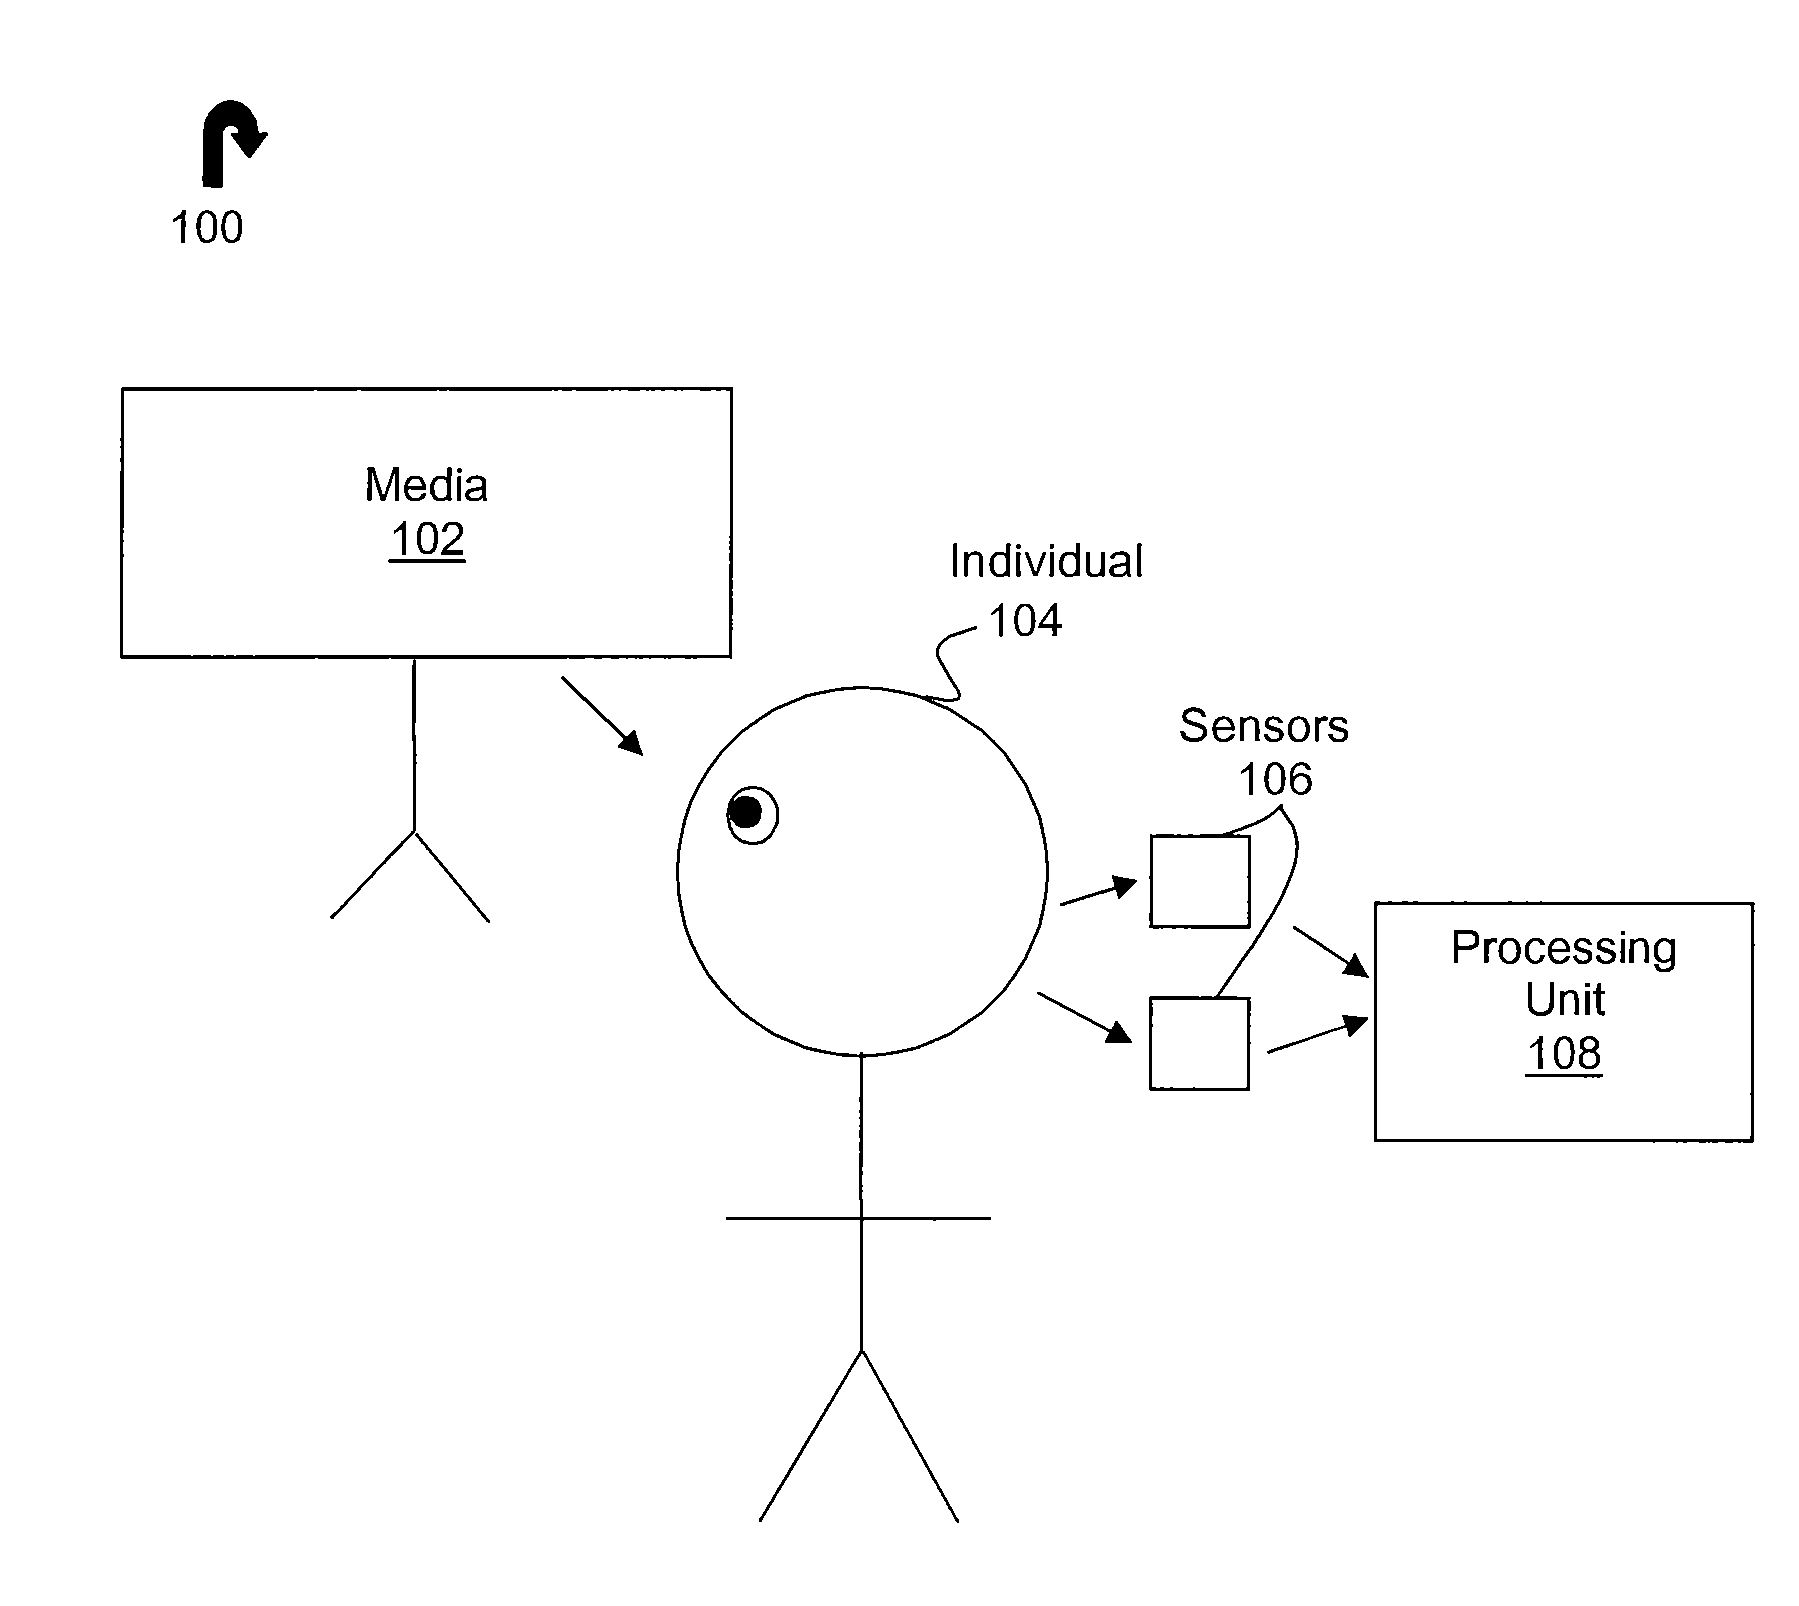 Method and system for measuring and ranking an "engagement" response to audiovisual or interactive media, products, or activities using physiological signals